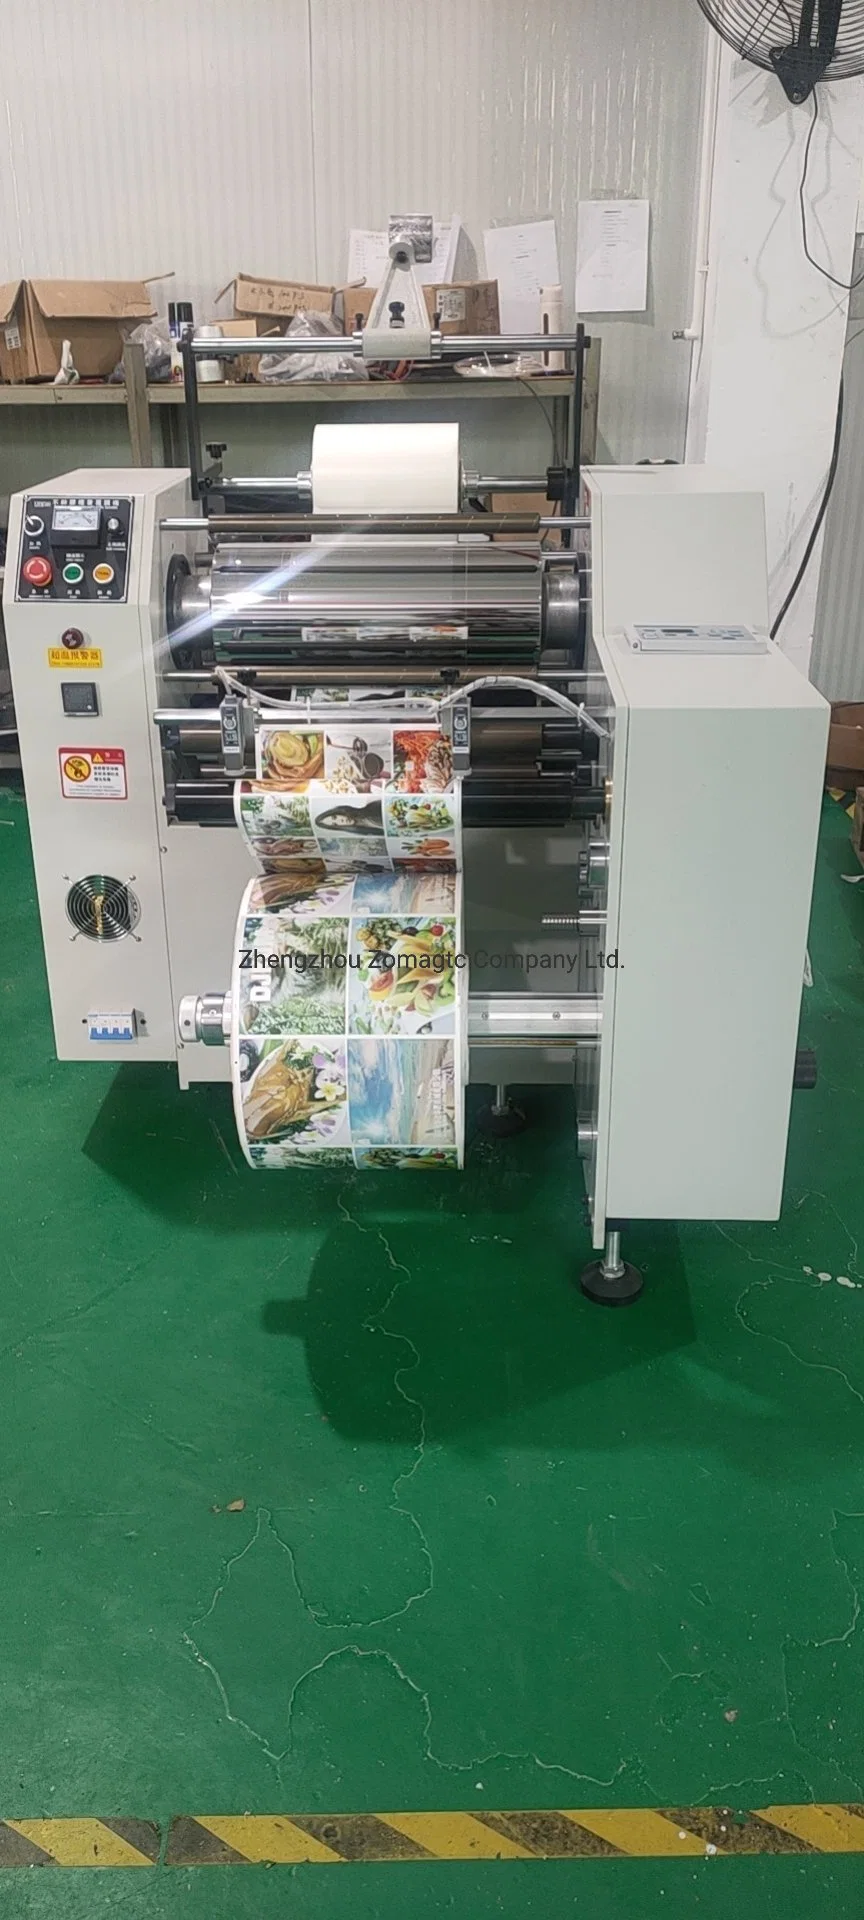 500mm Thermal Hot and Cold Paper Roll Laminator Machine for Label